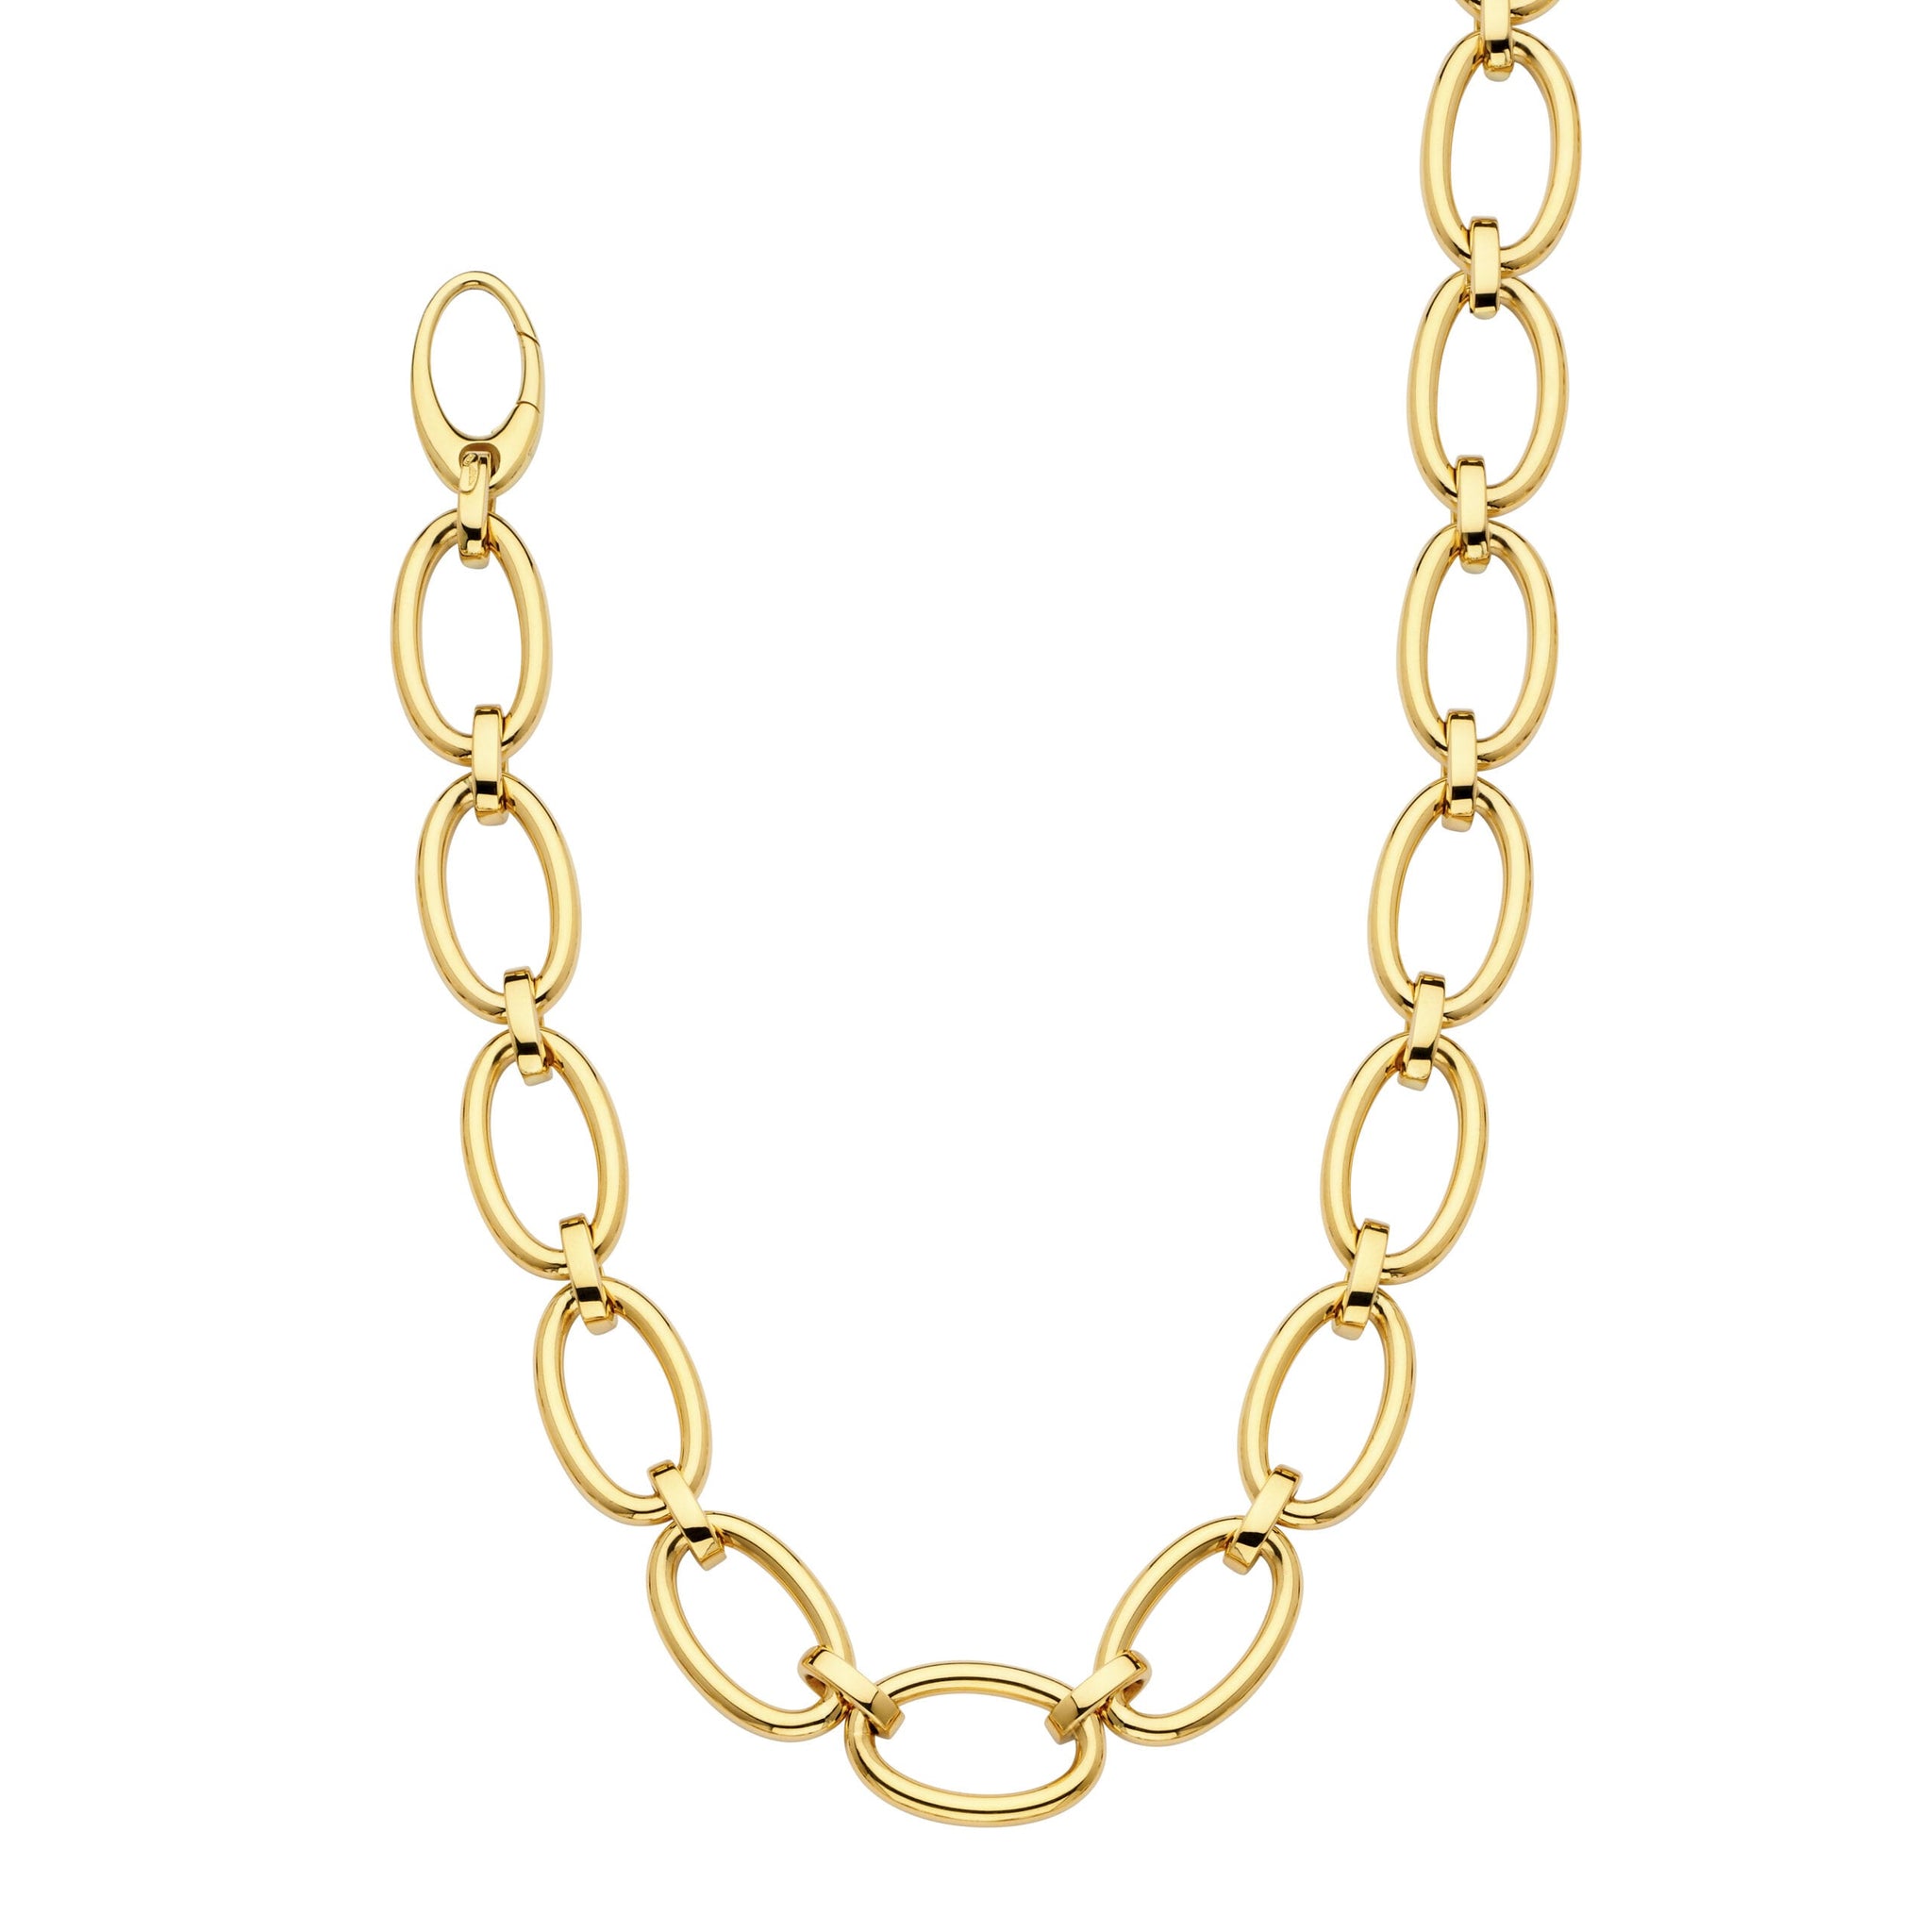 Gold Oval Link Chain Necklace, SOLD